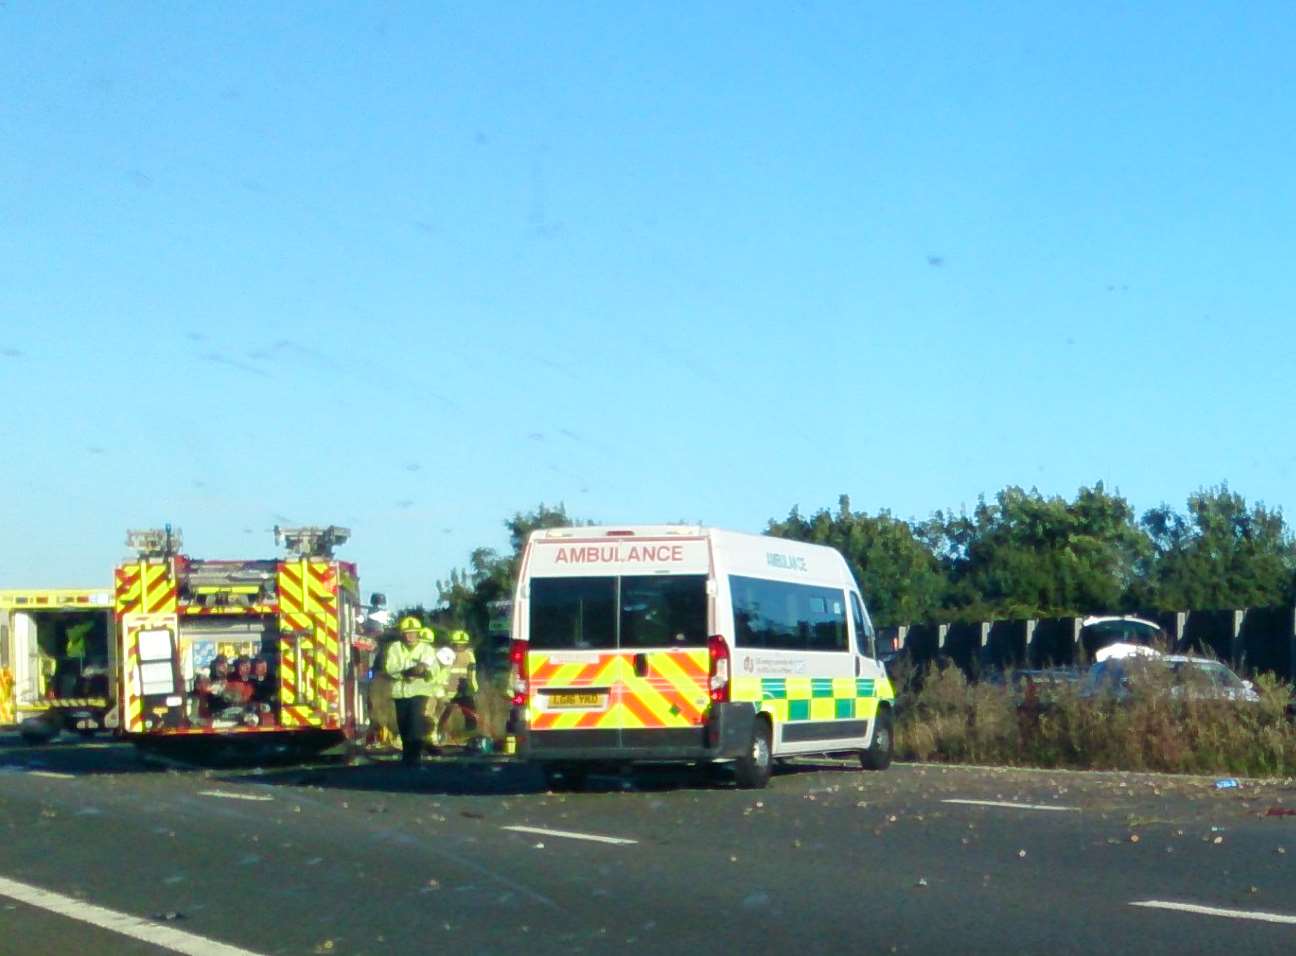 The scene of the crash on the M20. Credit: Ayrton Hathaway